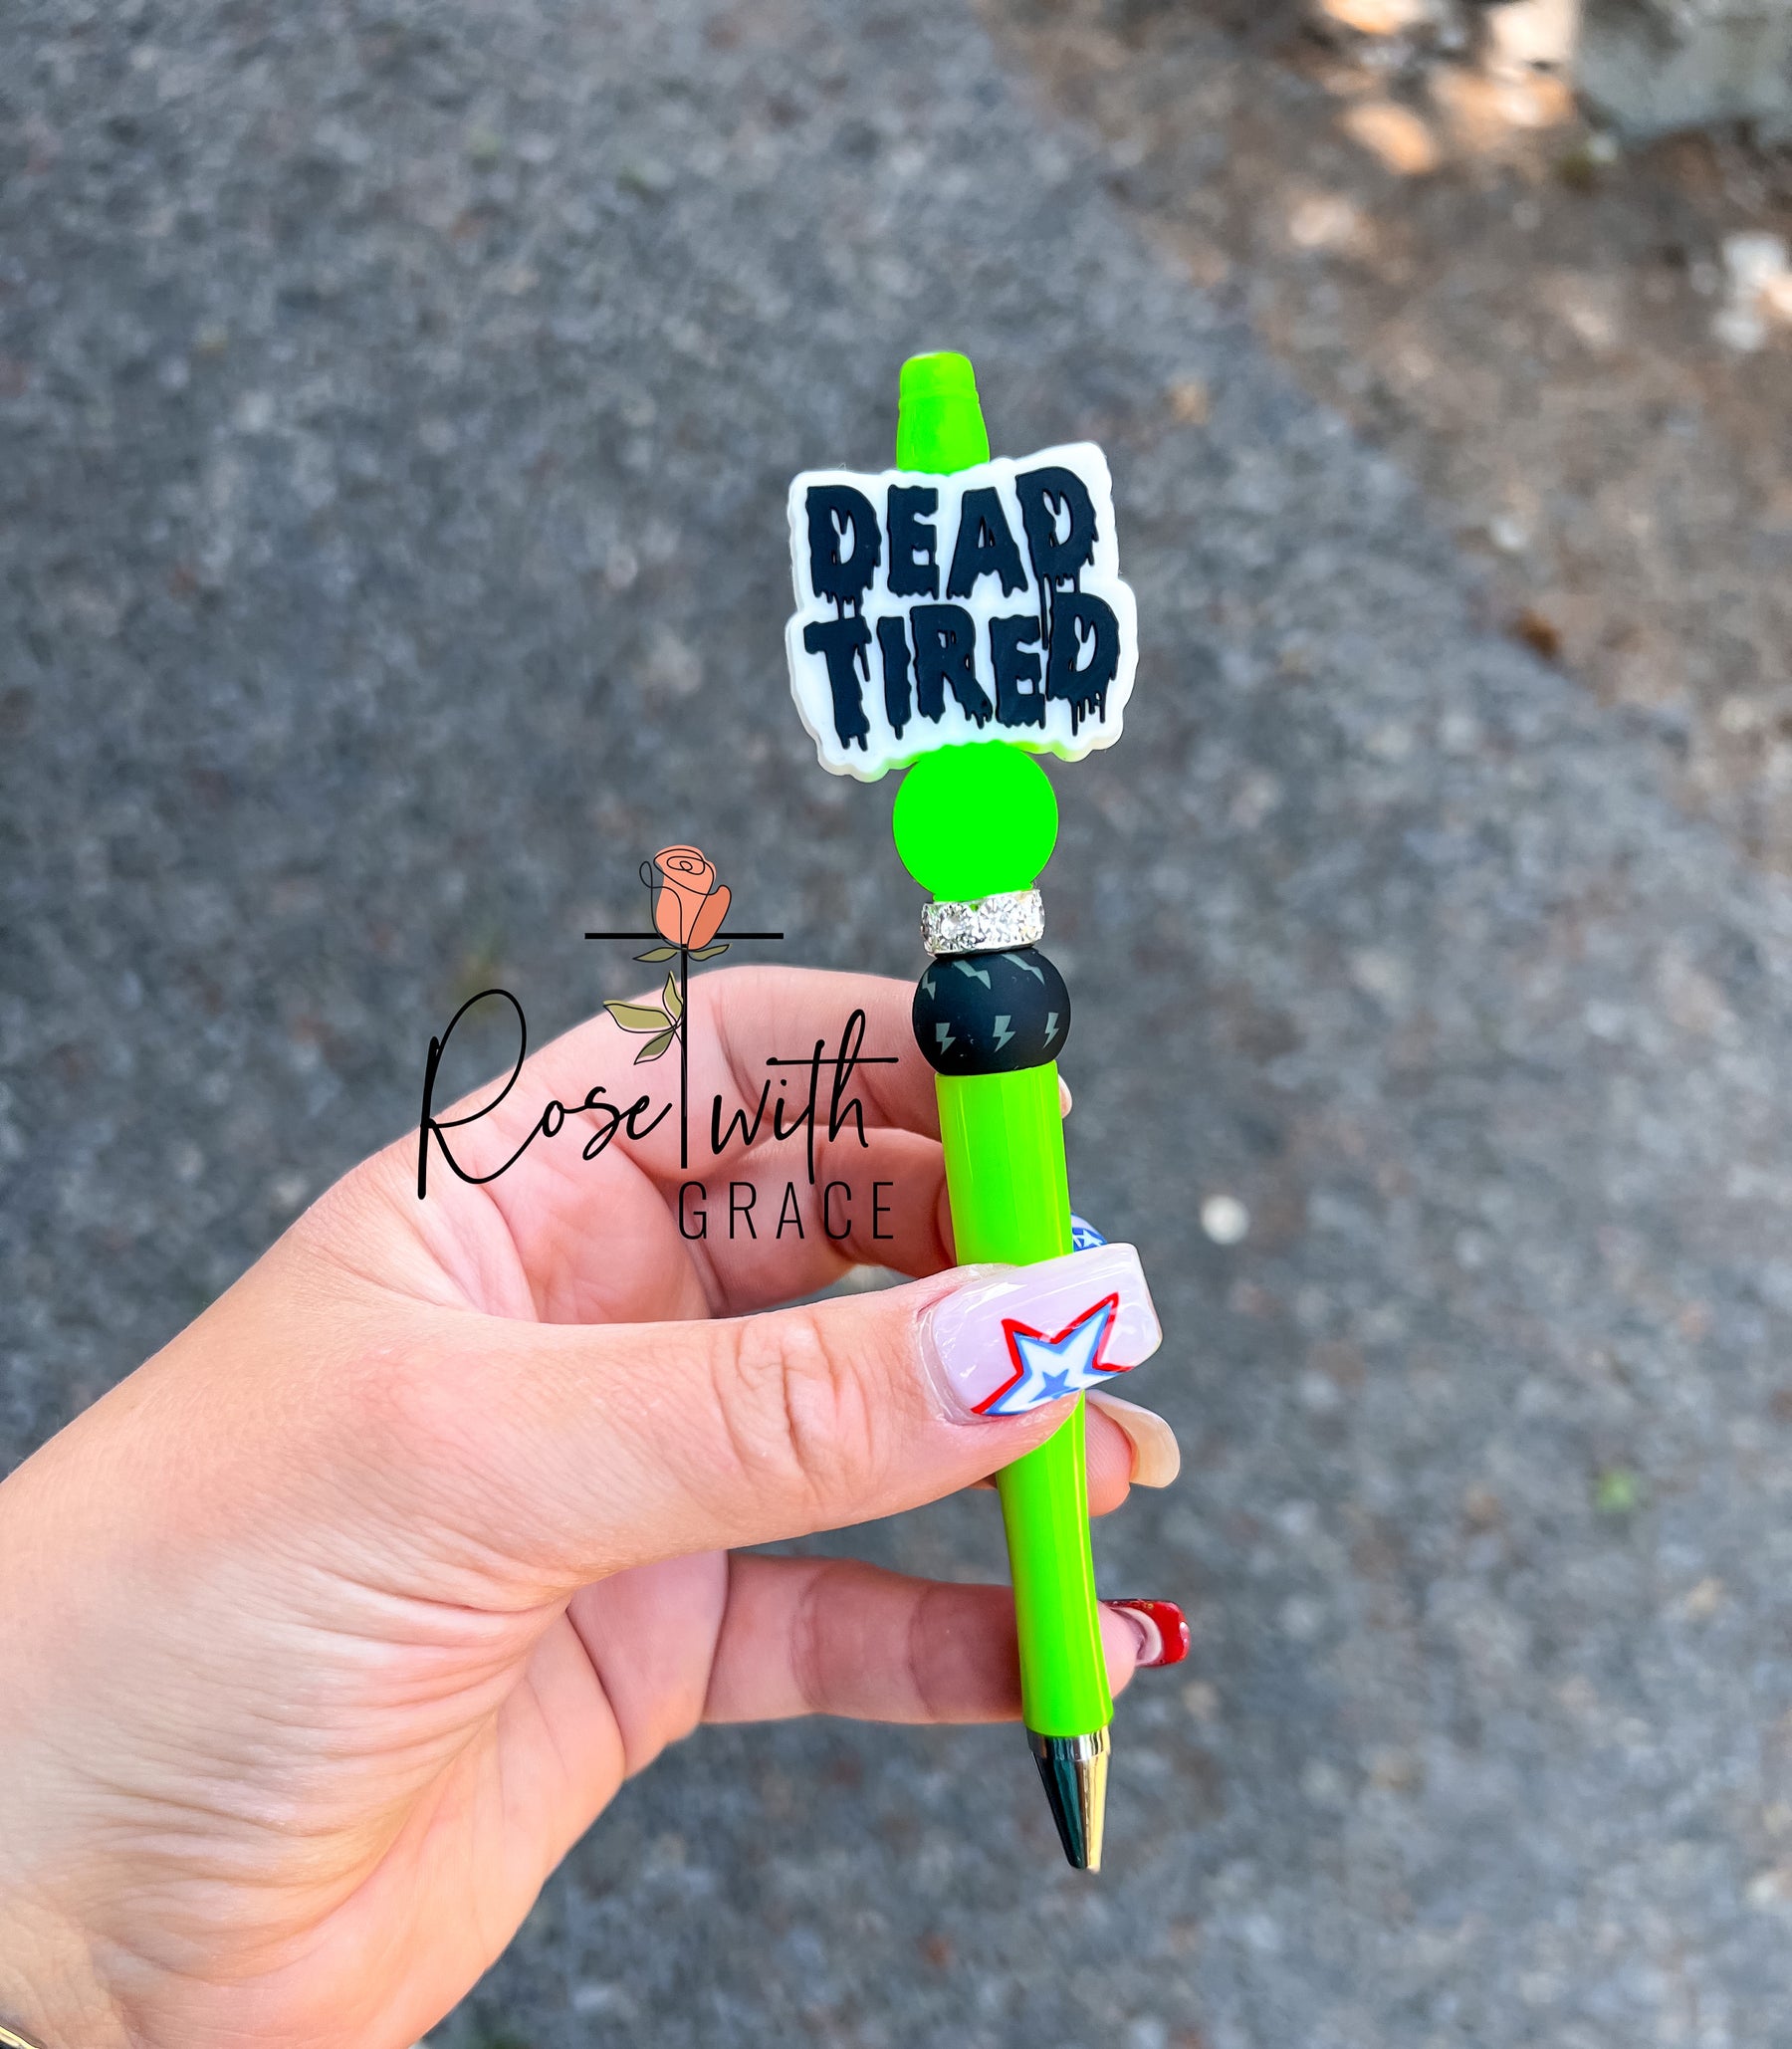 Dead Tired Pen Rose with Grace LLC